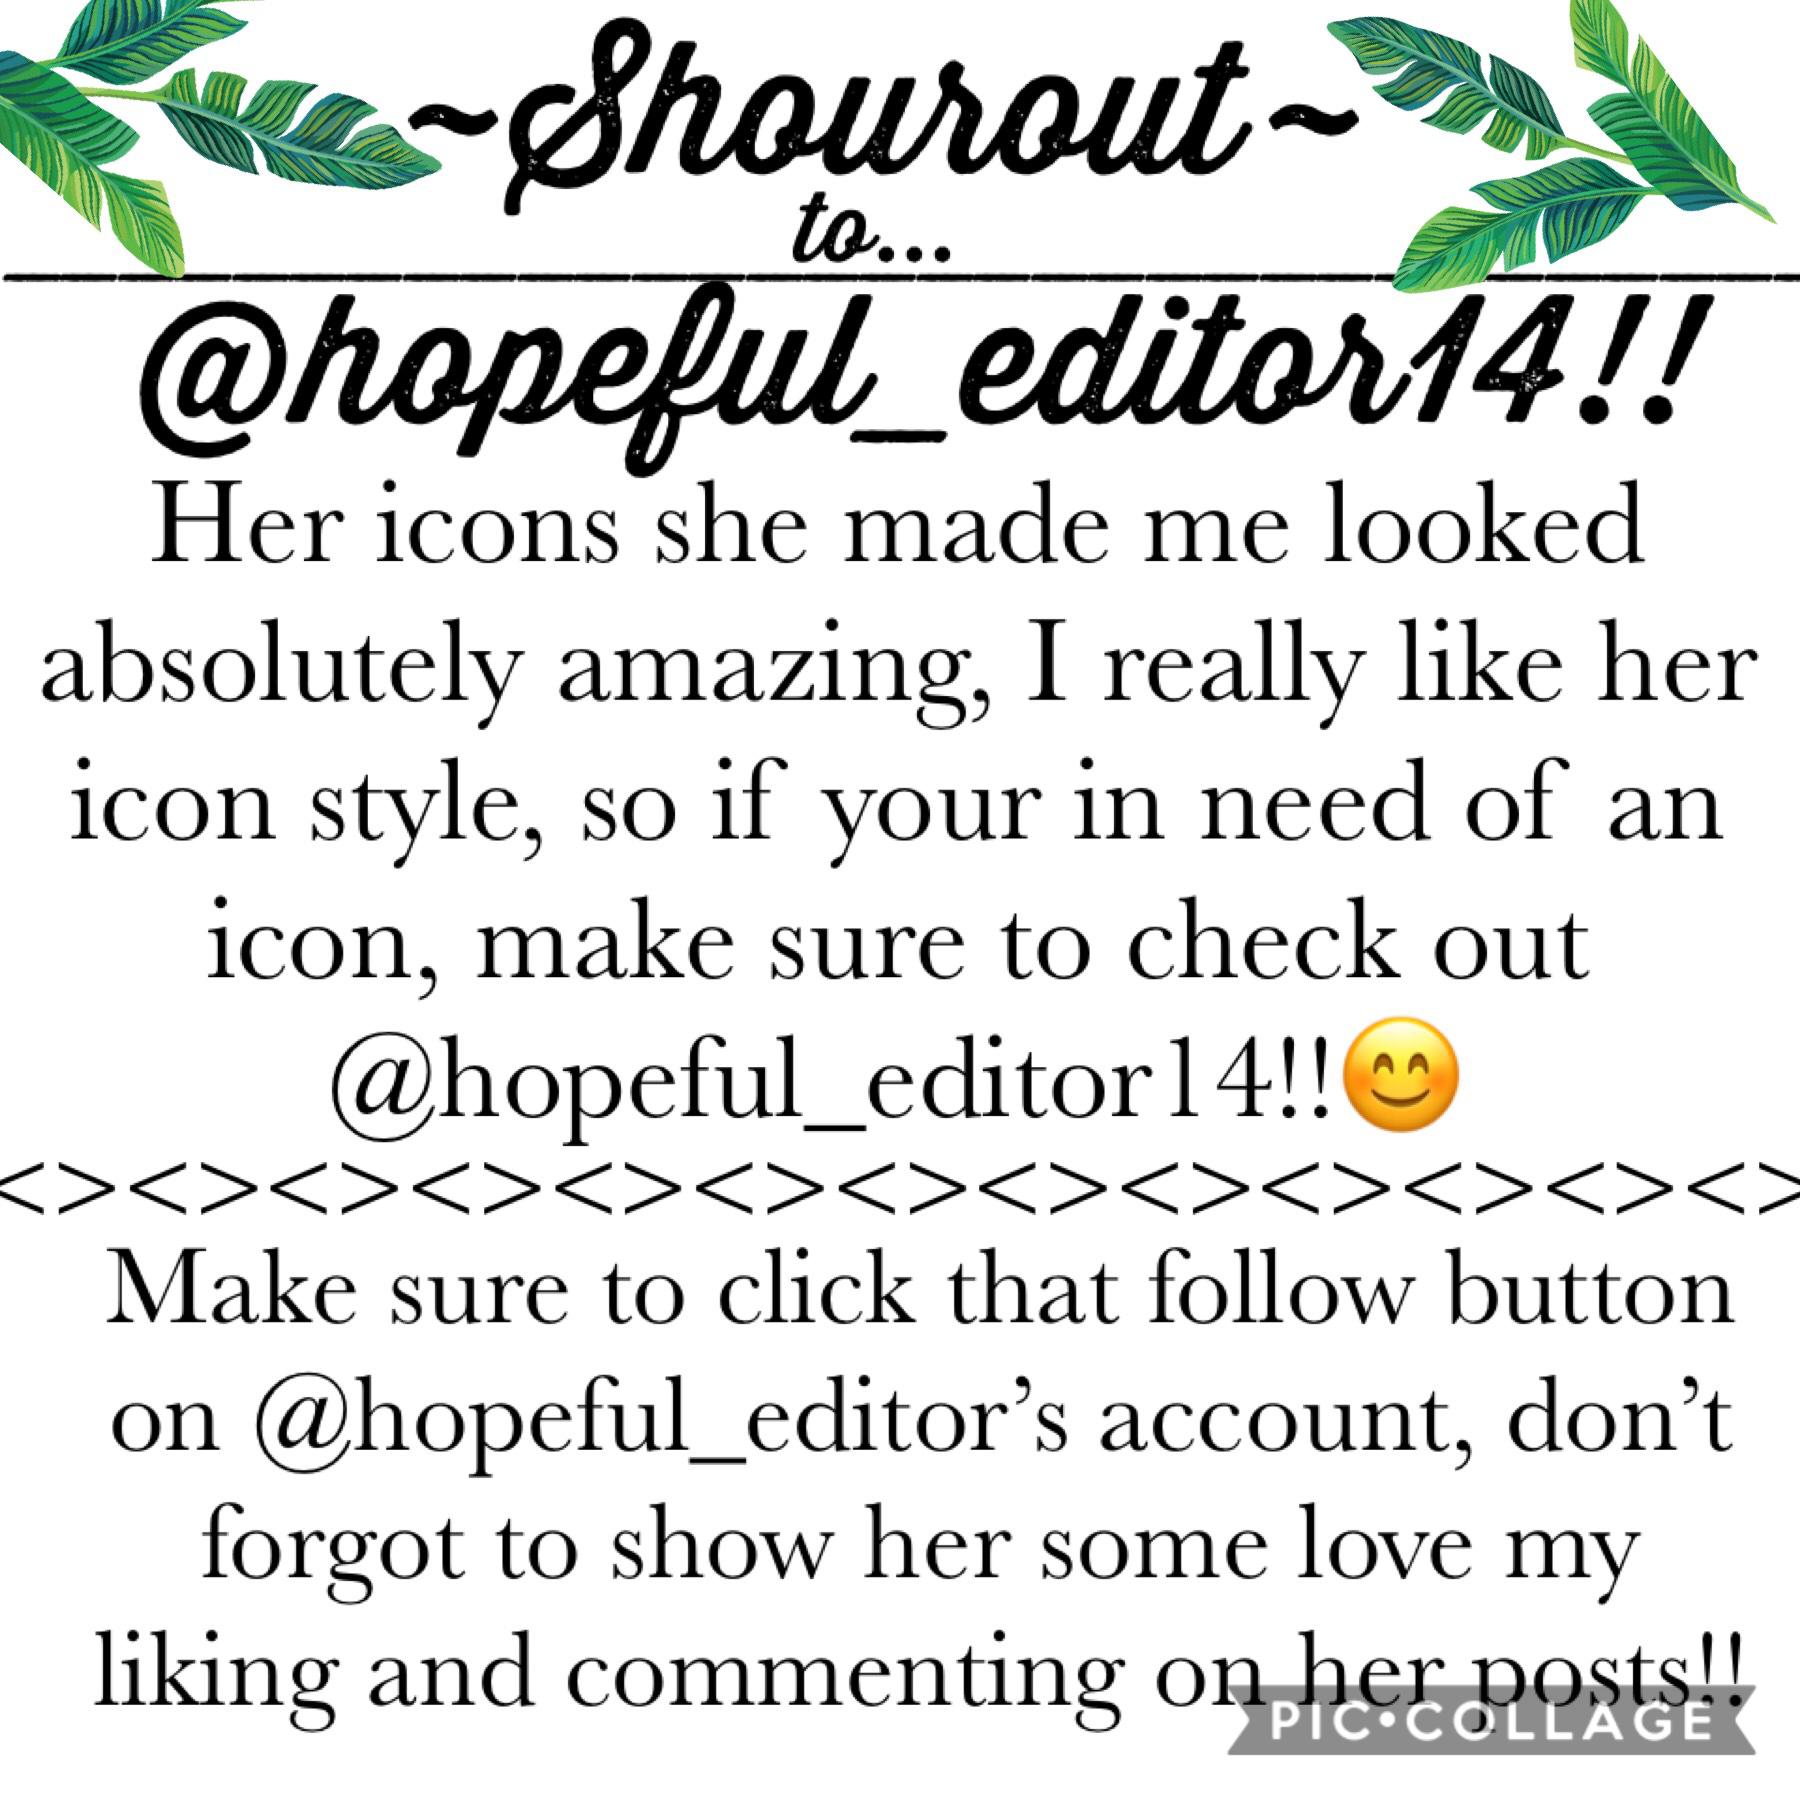 Shoutout to...🥁🥁🥁 (tap to see who the shoutout is for)

@hopeful_editor14!!🧁

She made by beautiful icons!😆

Make sure to follow her!✨

Give her some love by liking and commenting nice things on her collages!!😊